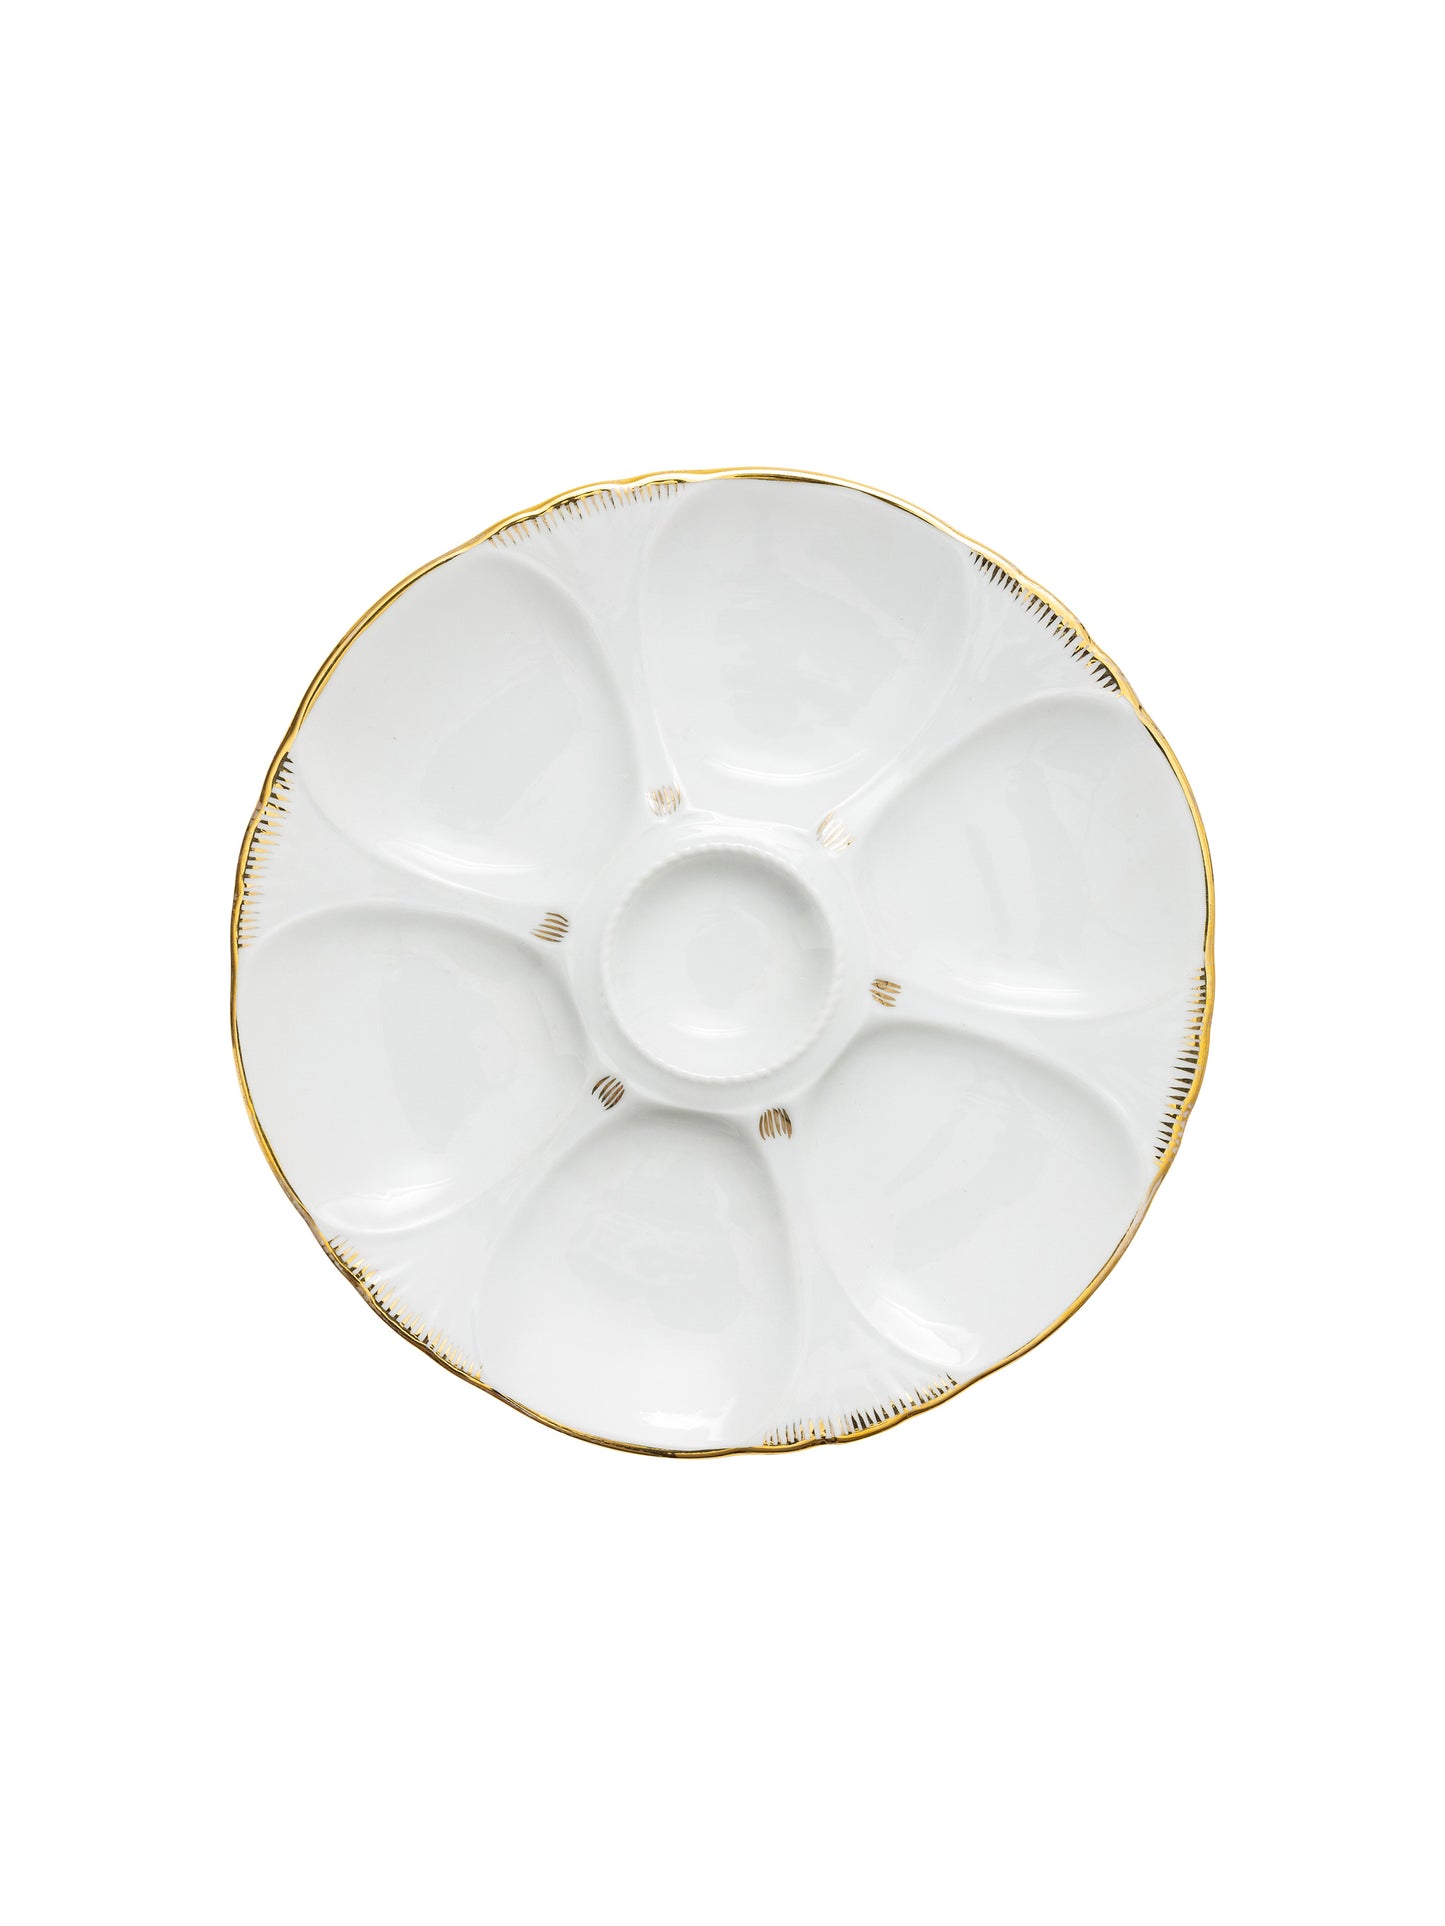 Vintage 1930s Limoges White and Gold Oyster Plate Weston Table